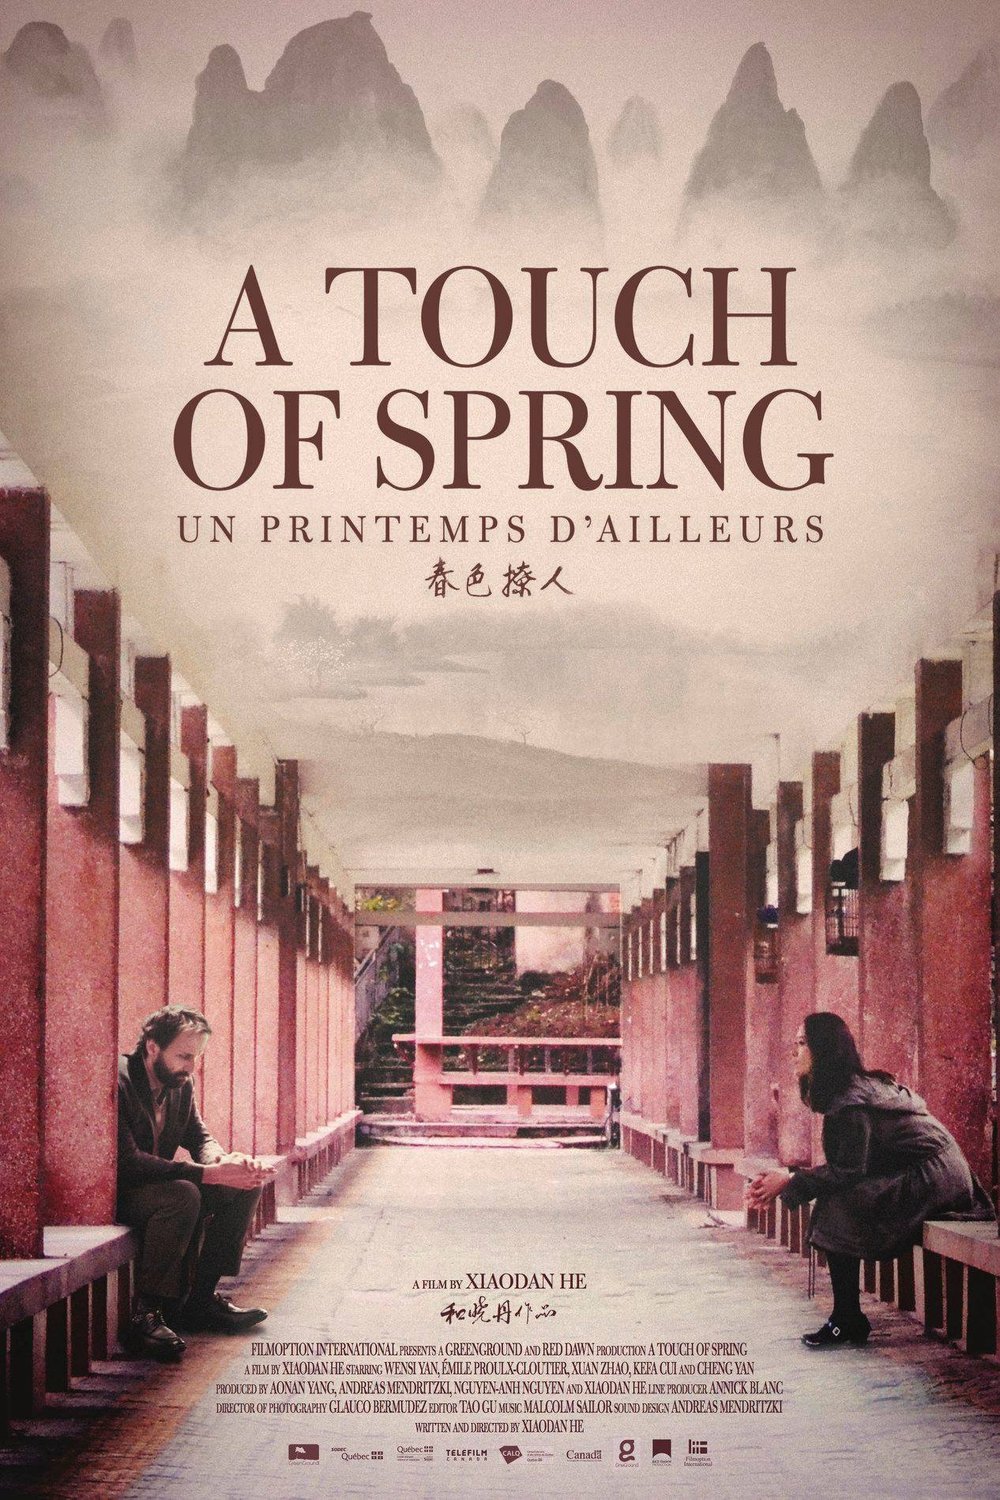 Poster of the movie A Touch of Spring